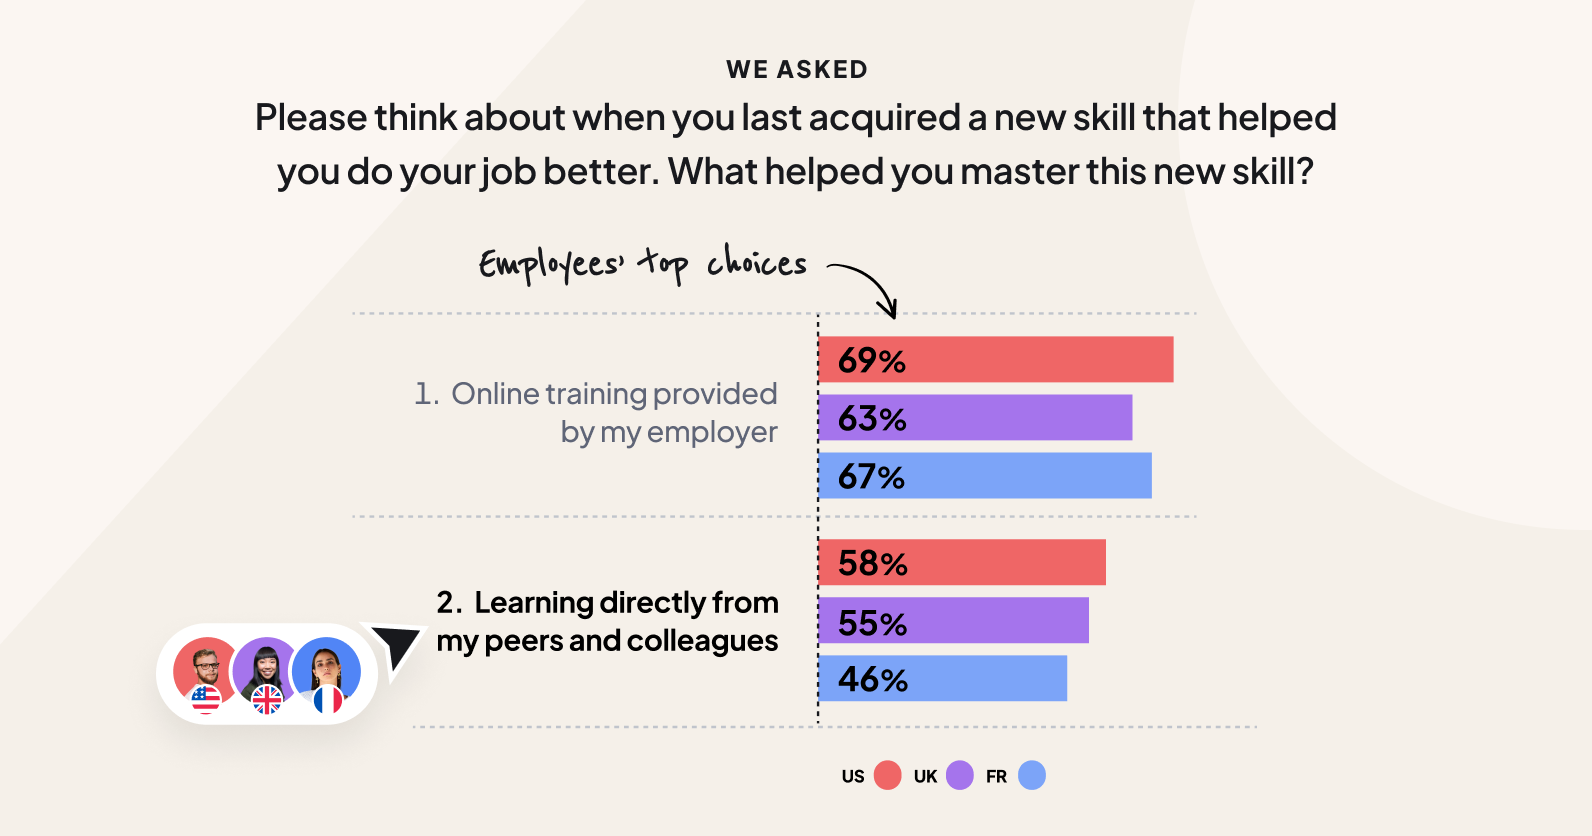 Peer learning helps employees upskill